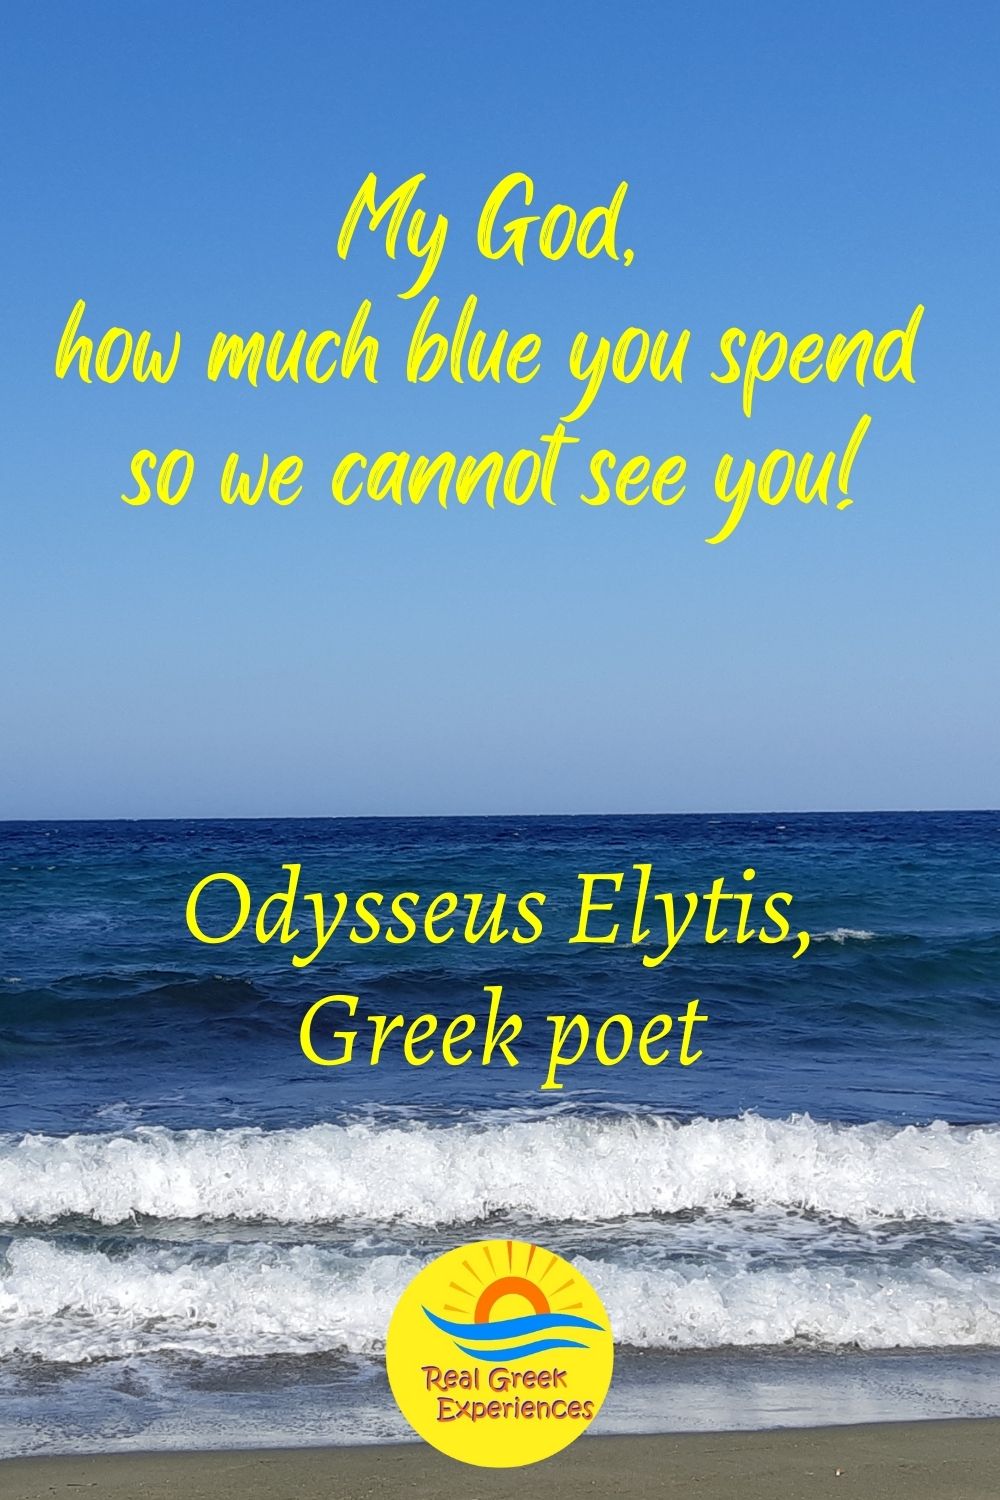 Inspirational Greek quotes - My God, how much blue you spend so we cannot see you! - Odysseus Elytis